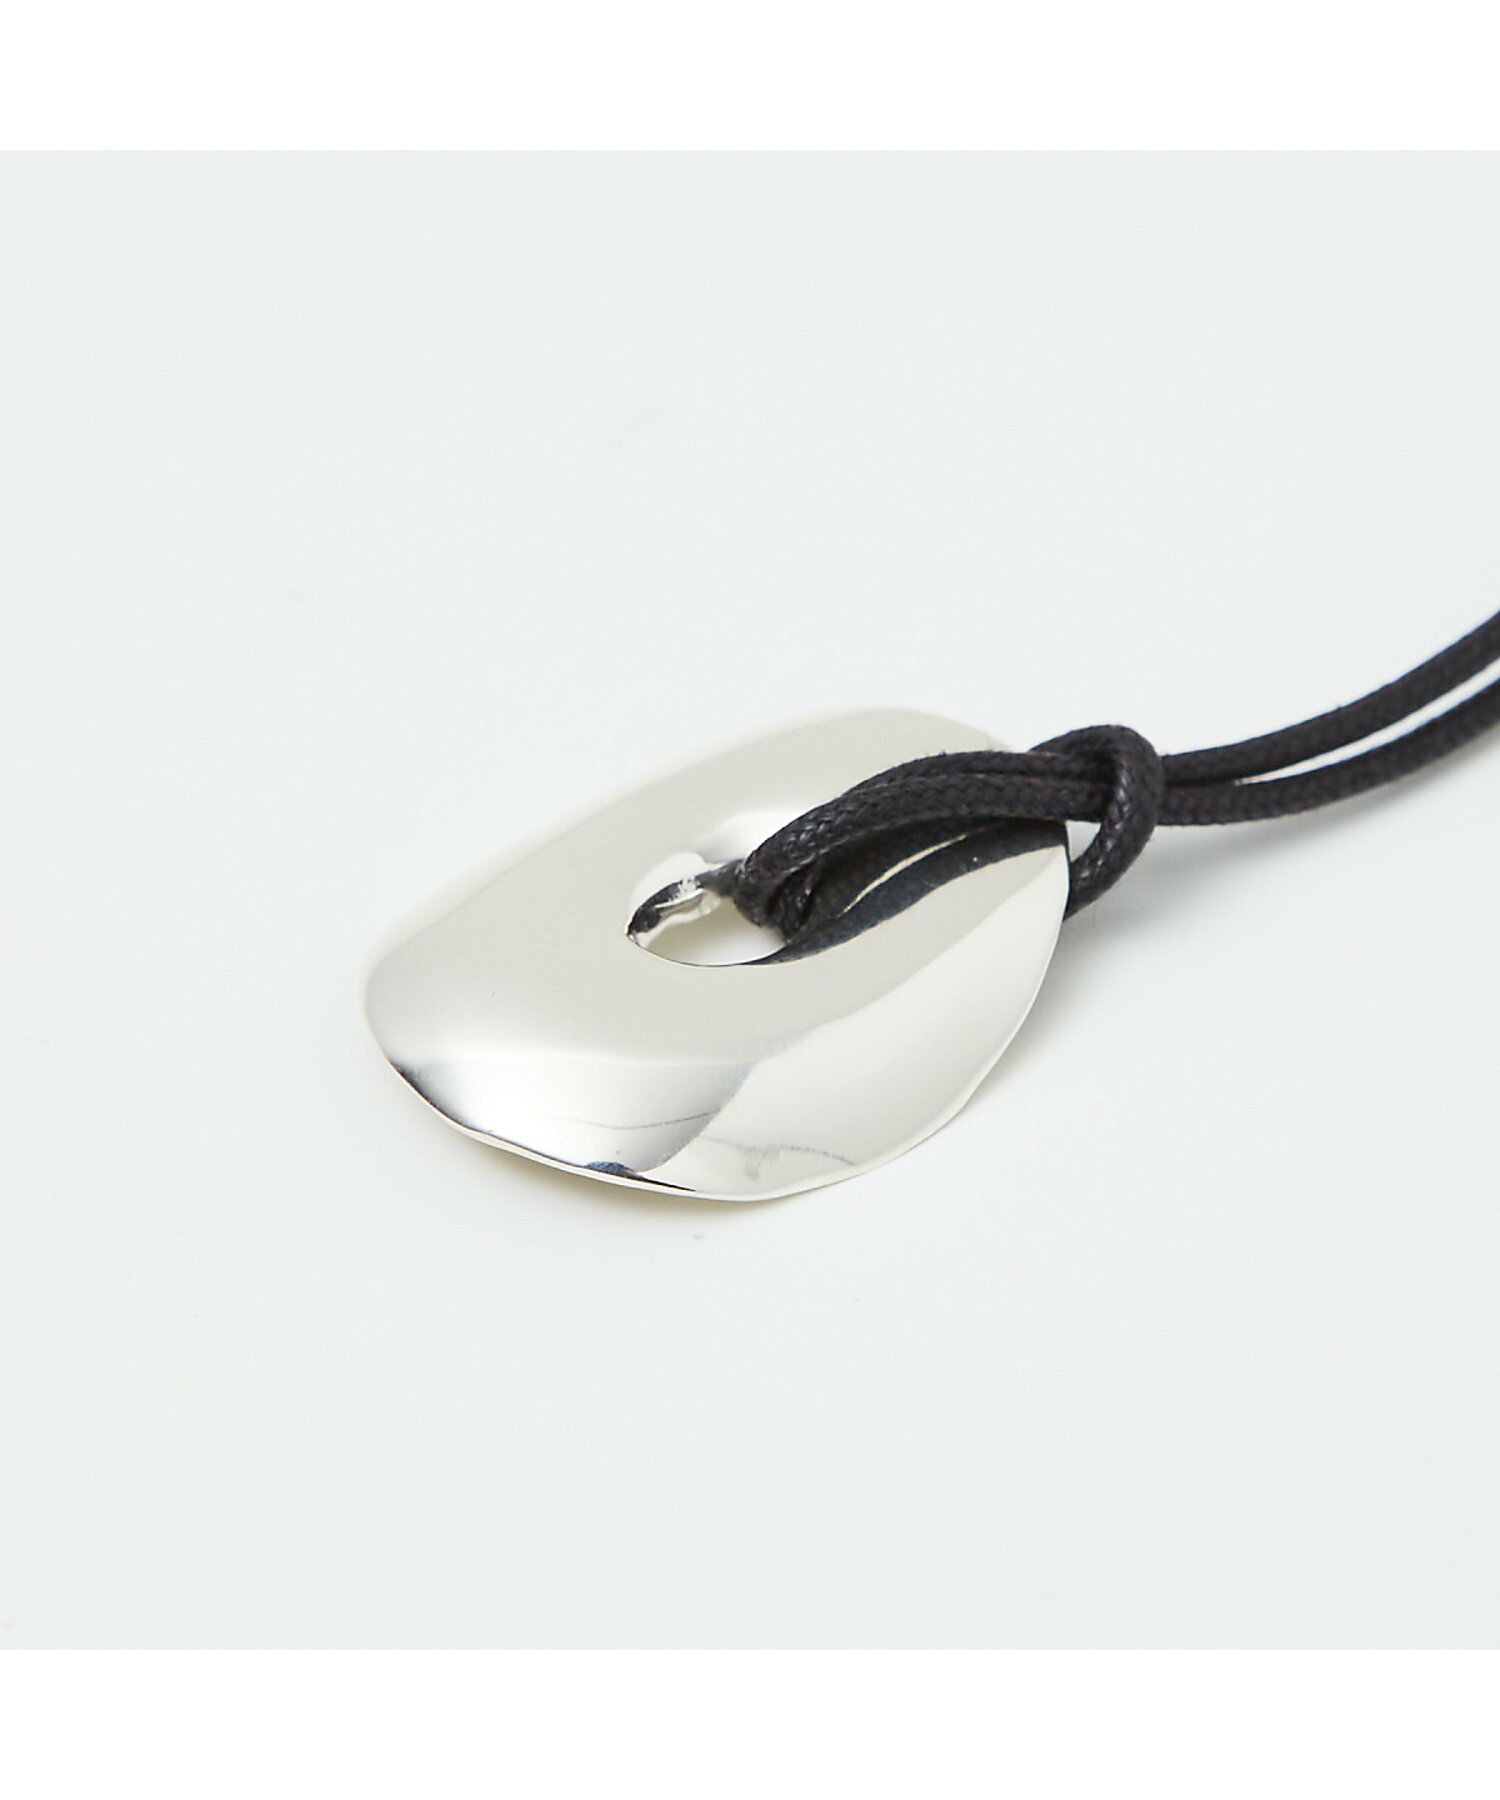 【Lemme./レム】 Curvature Necklace コードネックレス